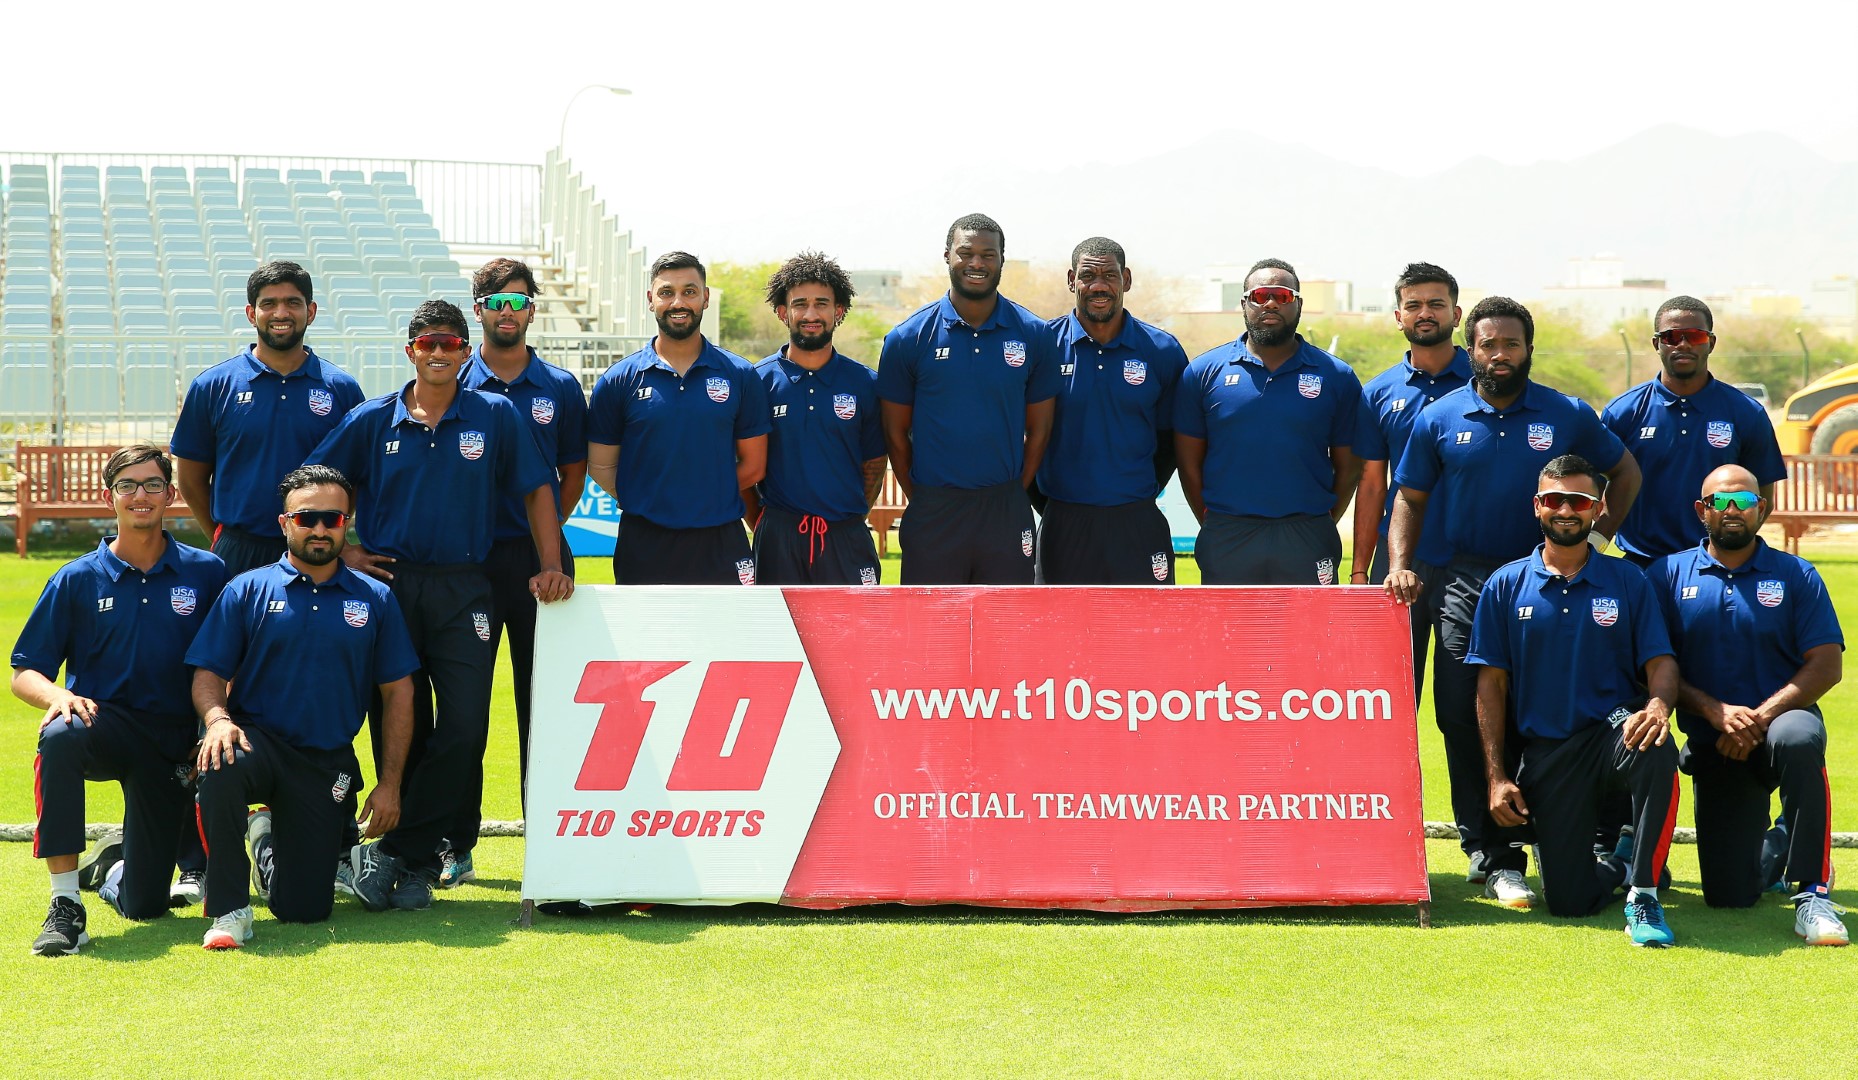 USA Cricket Unveils T10 Sports as Official Playing Kit & Apparel Partner